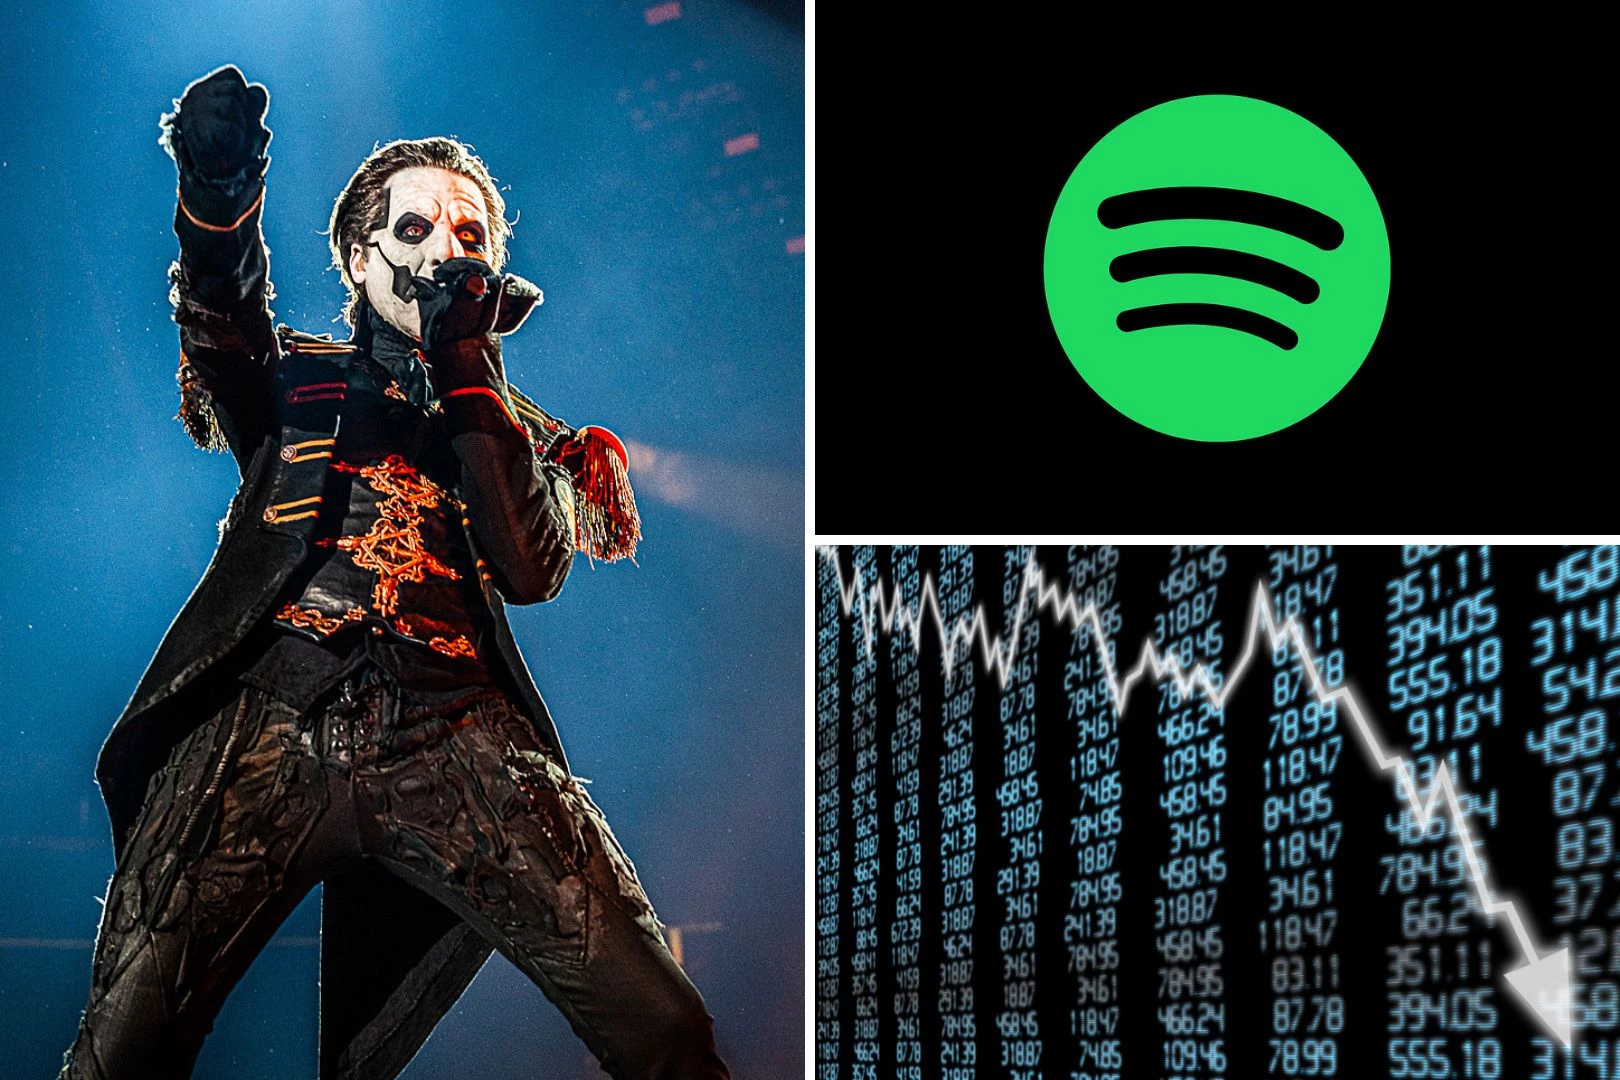 Ghost Fans Crash Spotify Live Servers, Band's Appearance Canceled